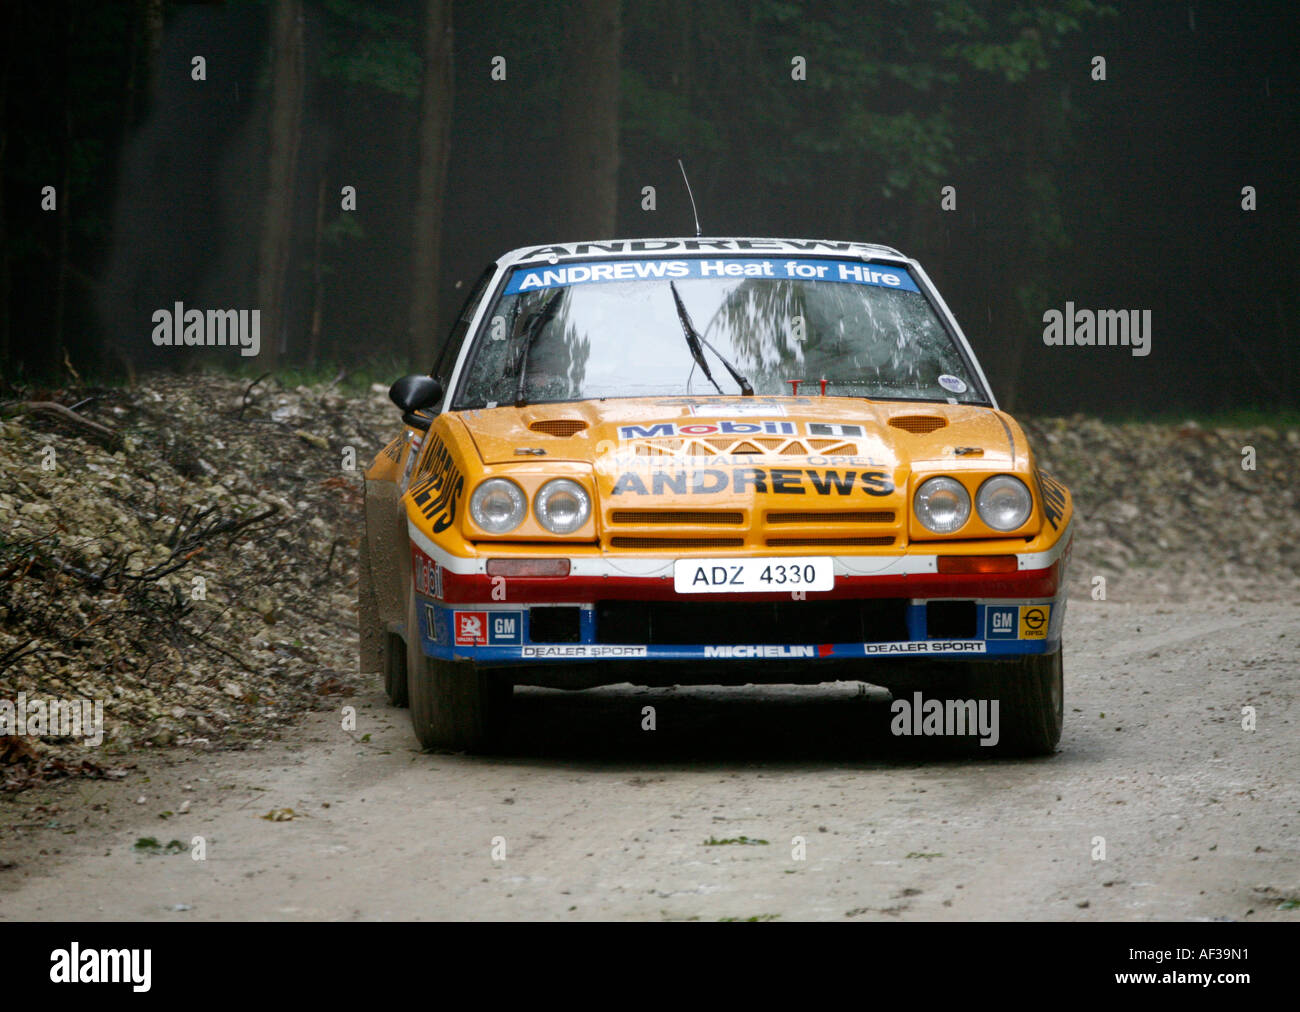 1985 Opel Manta 400 dans les mains de Russell Brookes à Goodwood Festival of Speed, Sussex, Angleterre. Banque D'Images